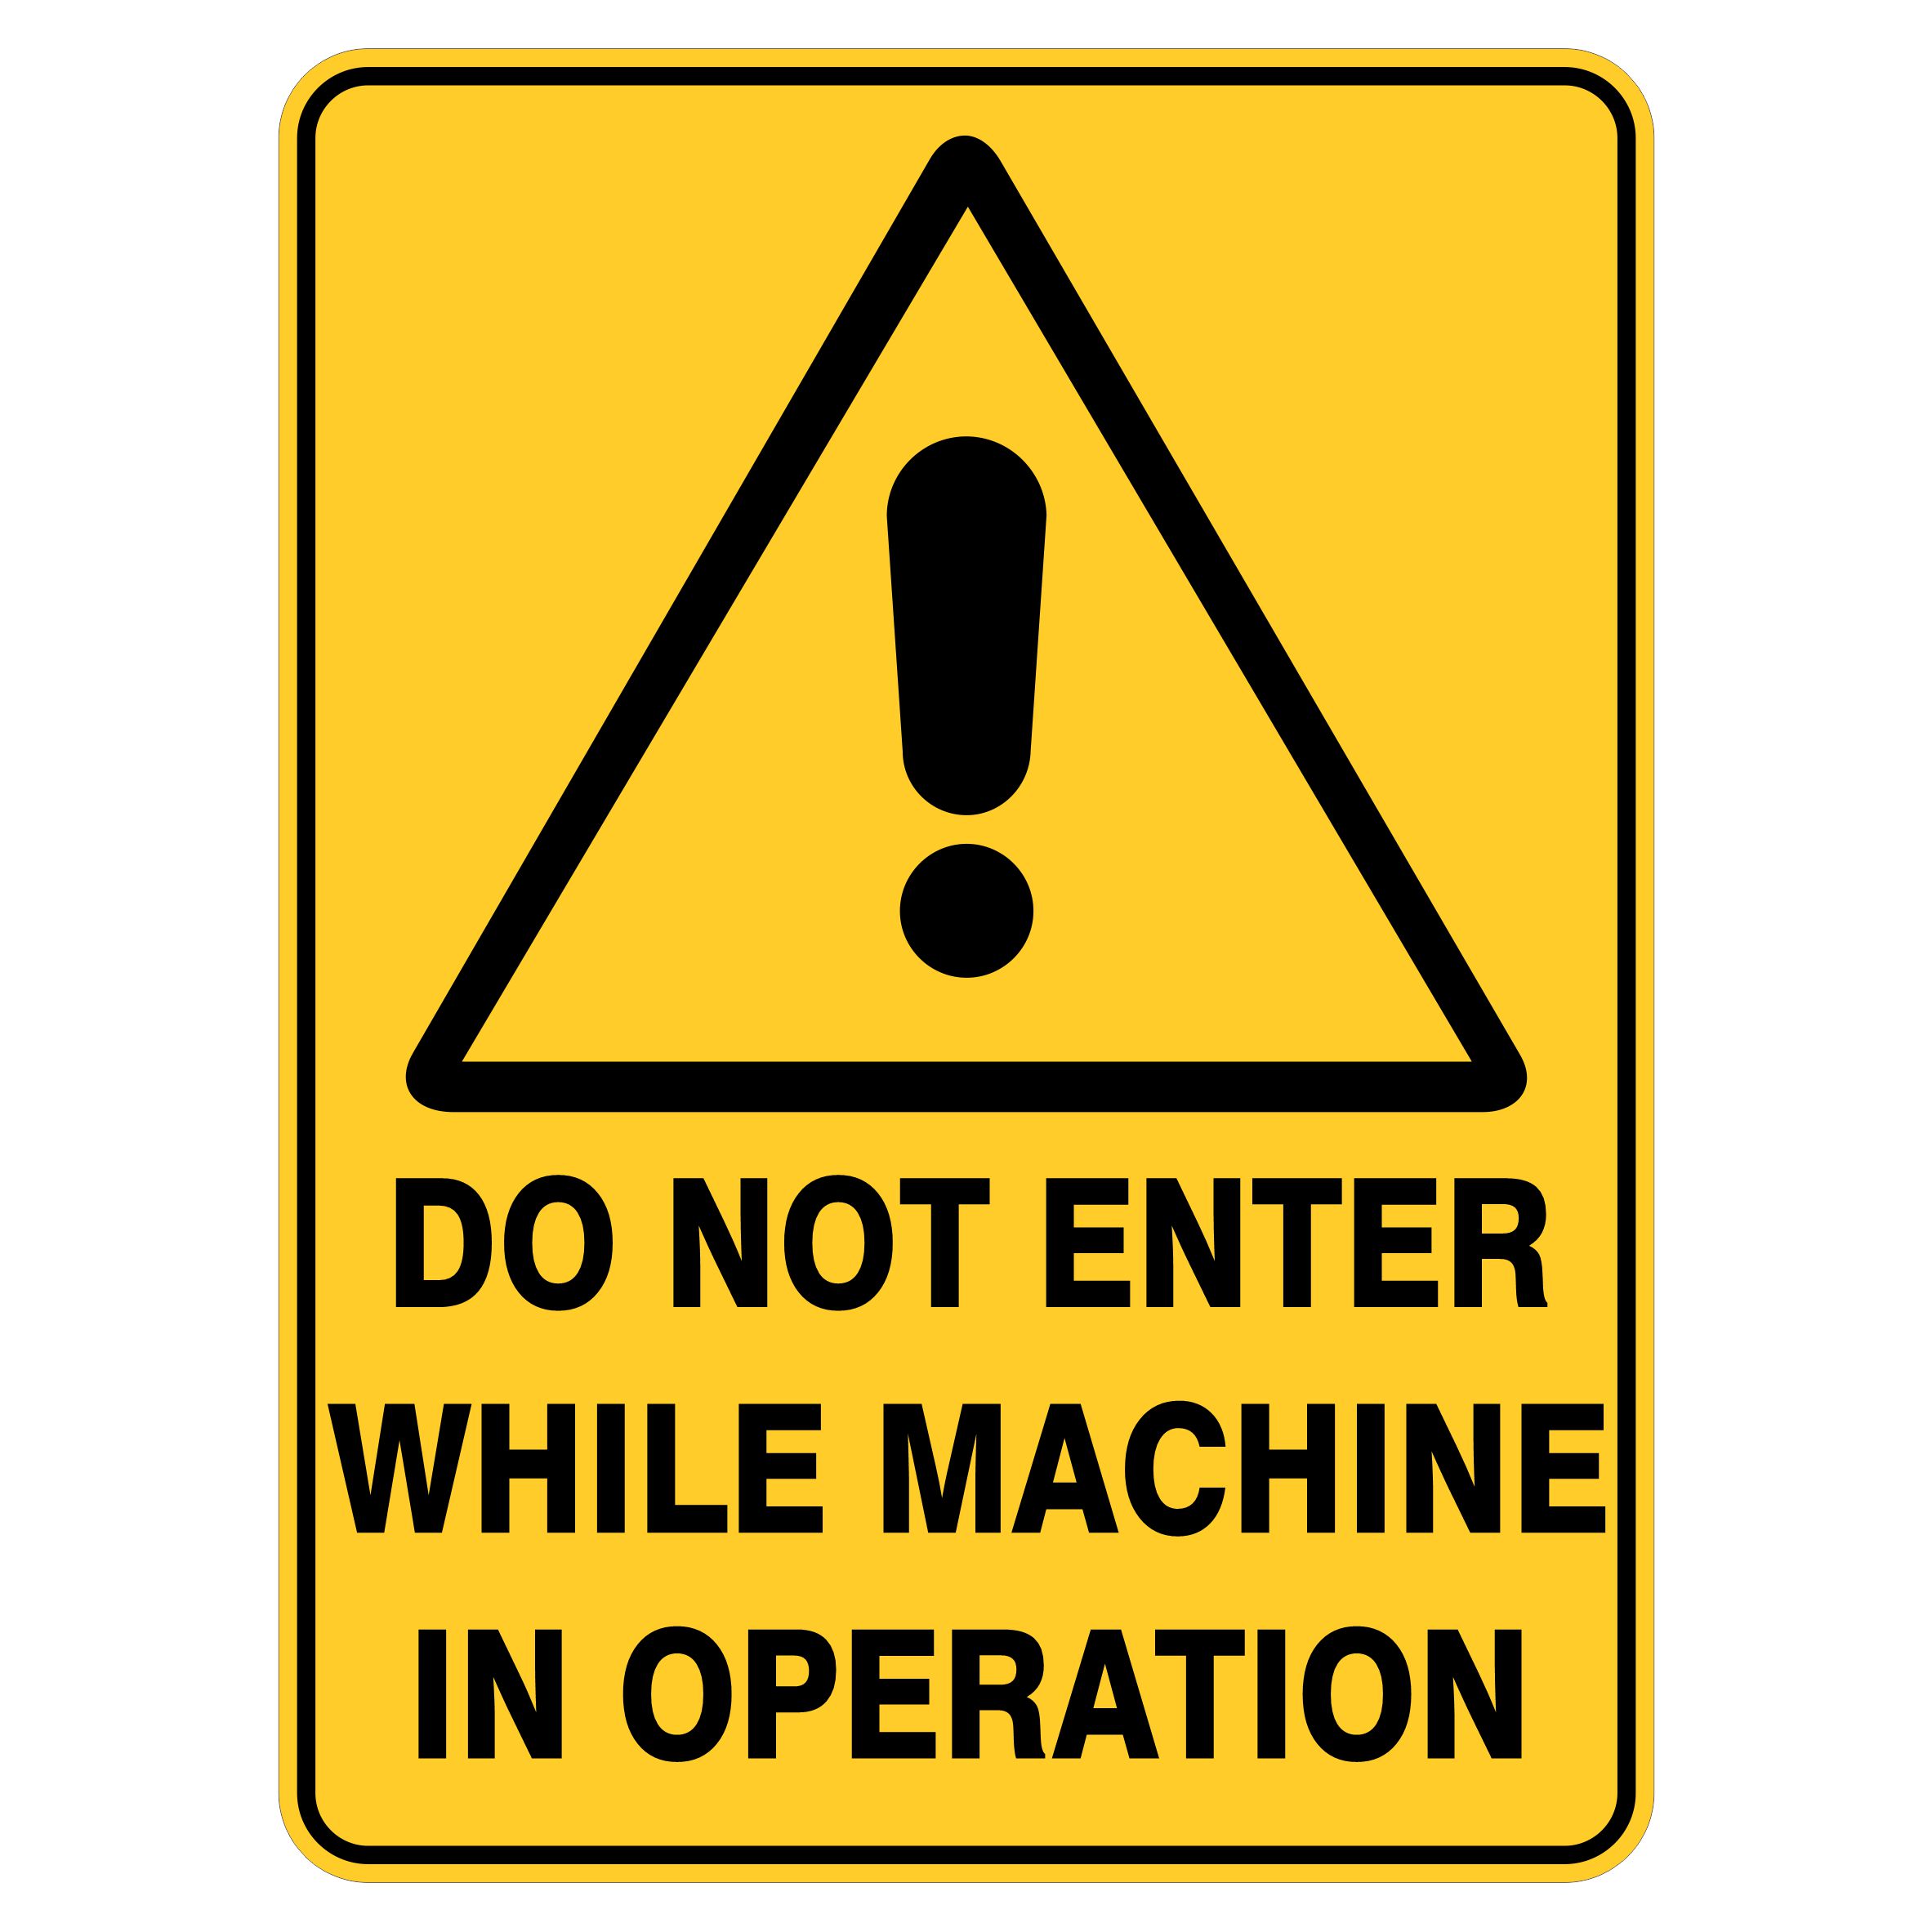 Do not enter machine while in operation - Safety Sign